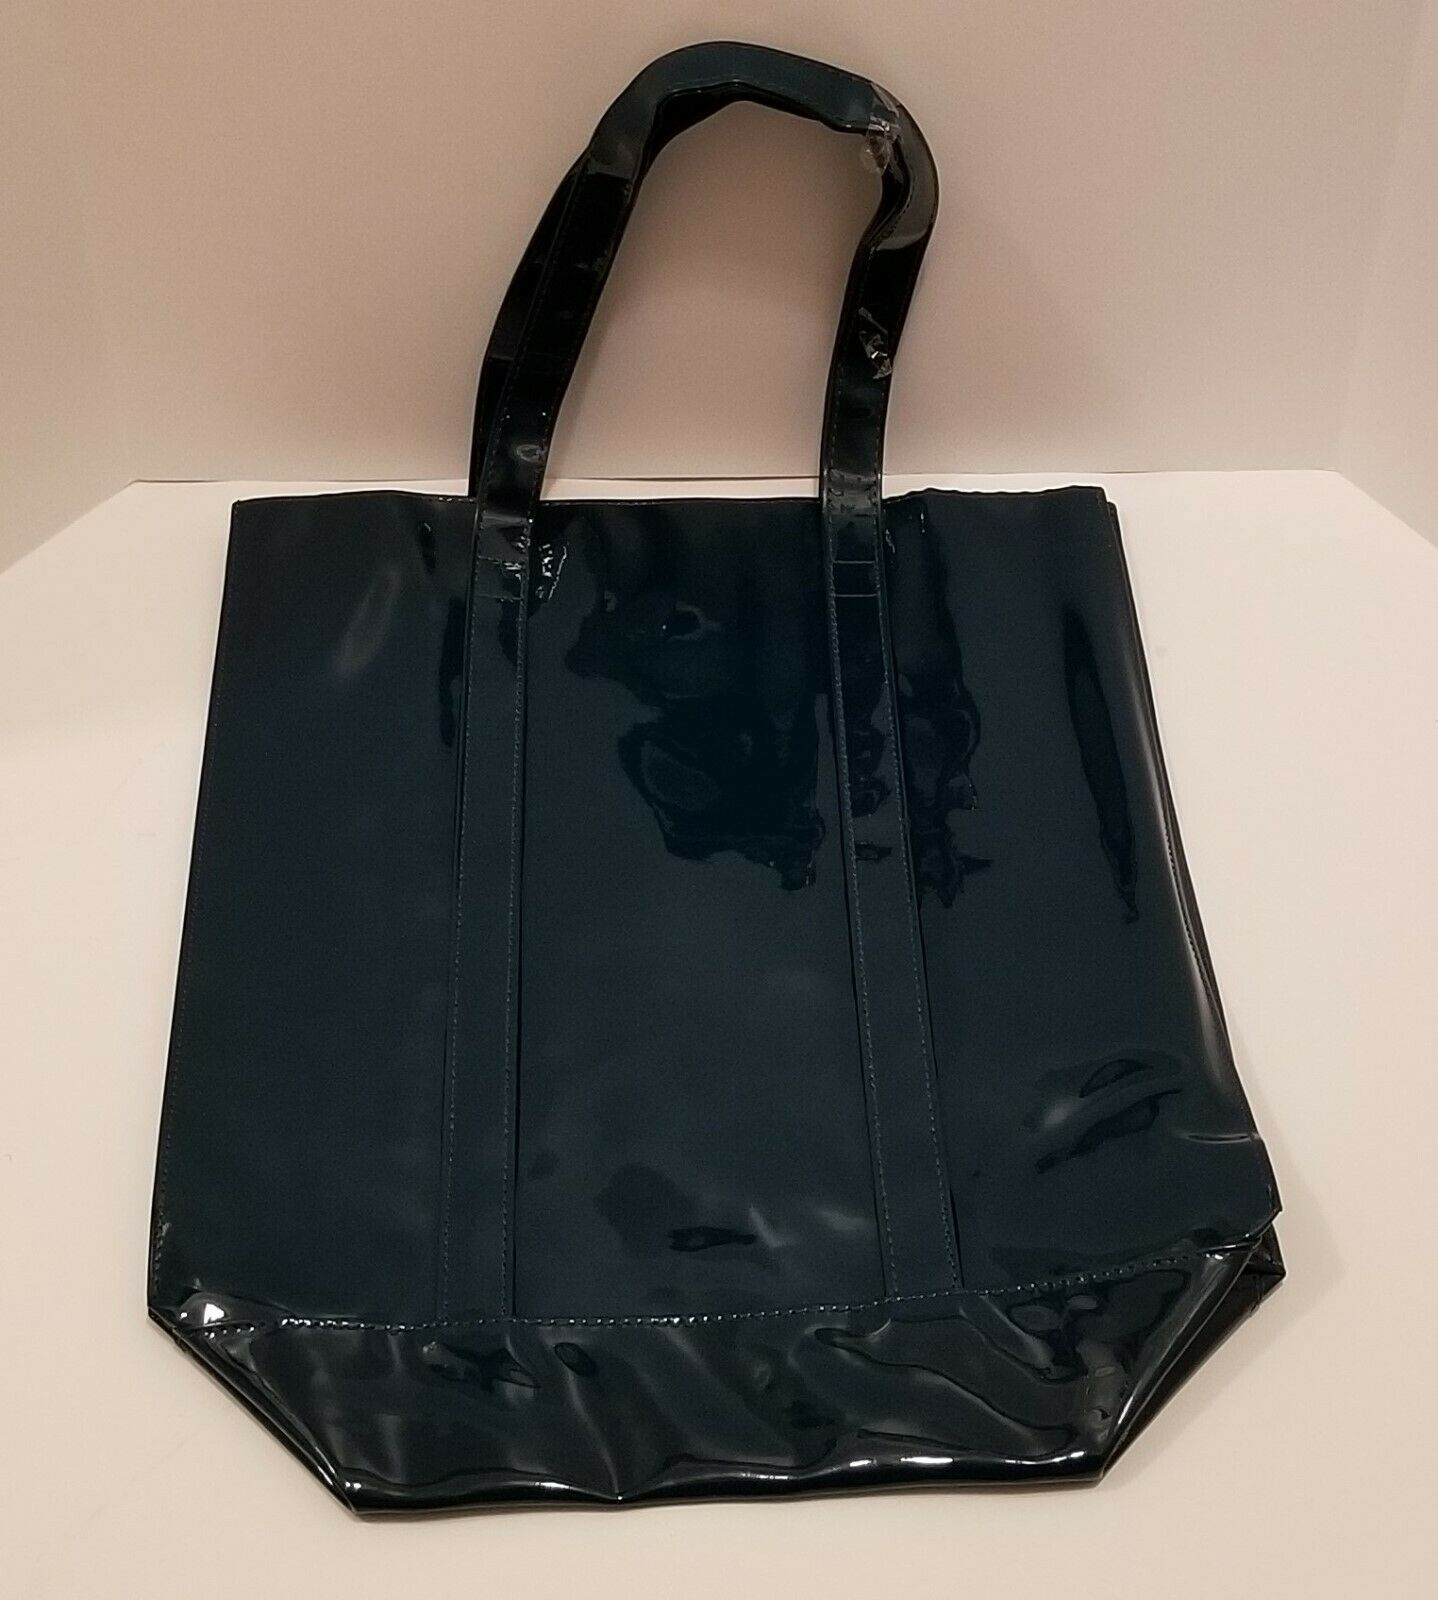 Twelve NYC Glossy Black Patent Faux Leather Tote Shopper Gift Bag/Purse - Rekes Sales